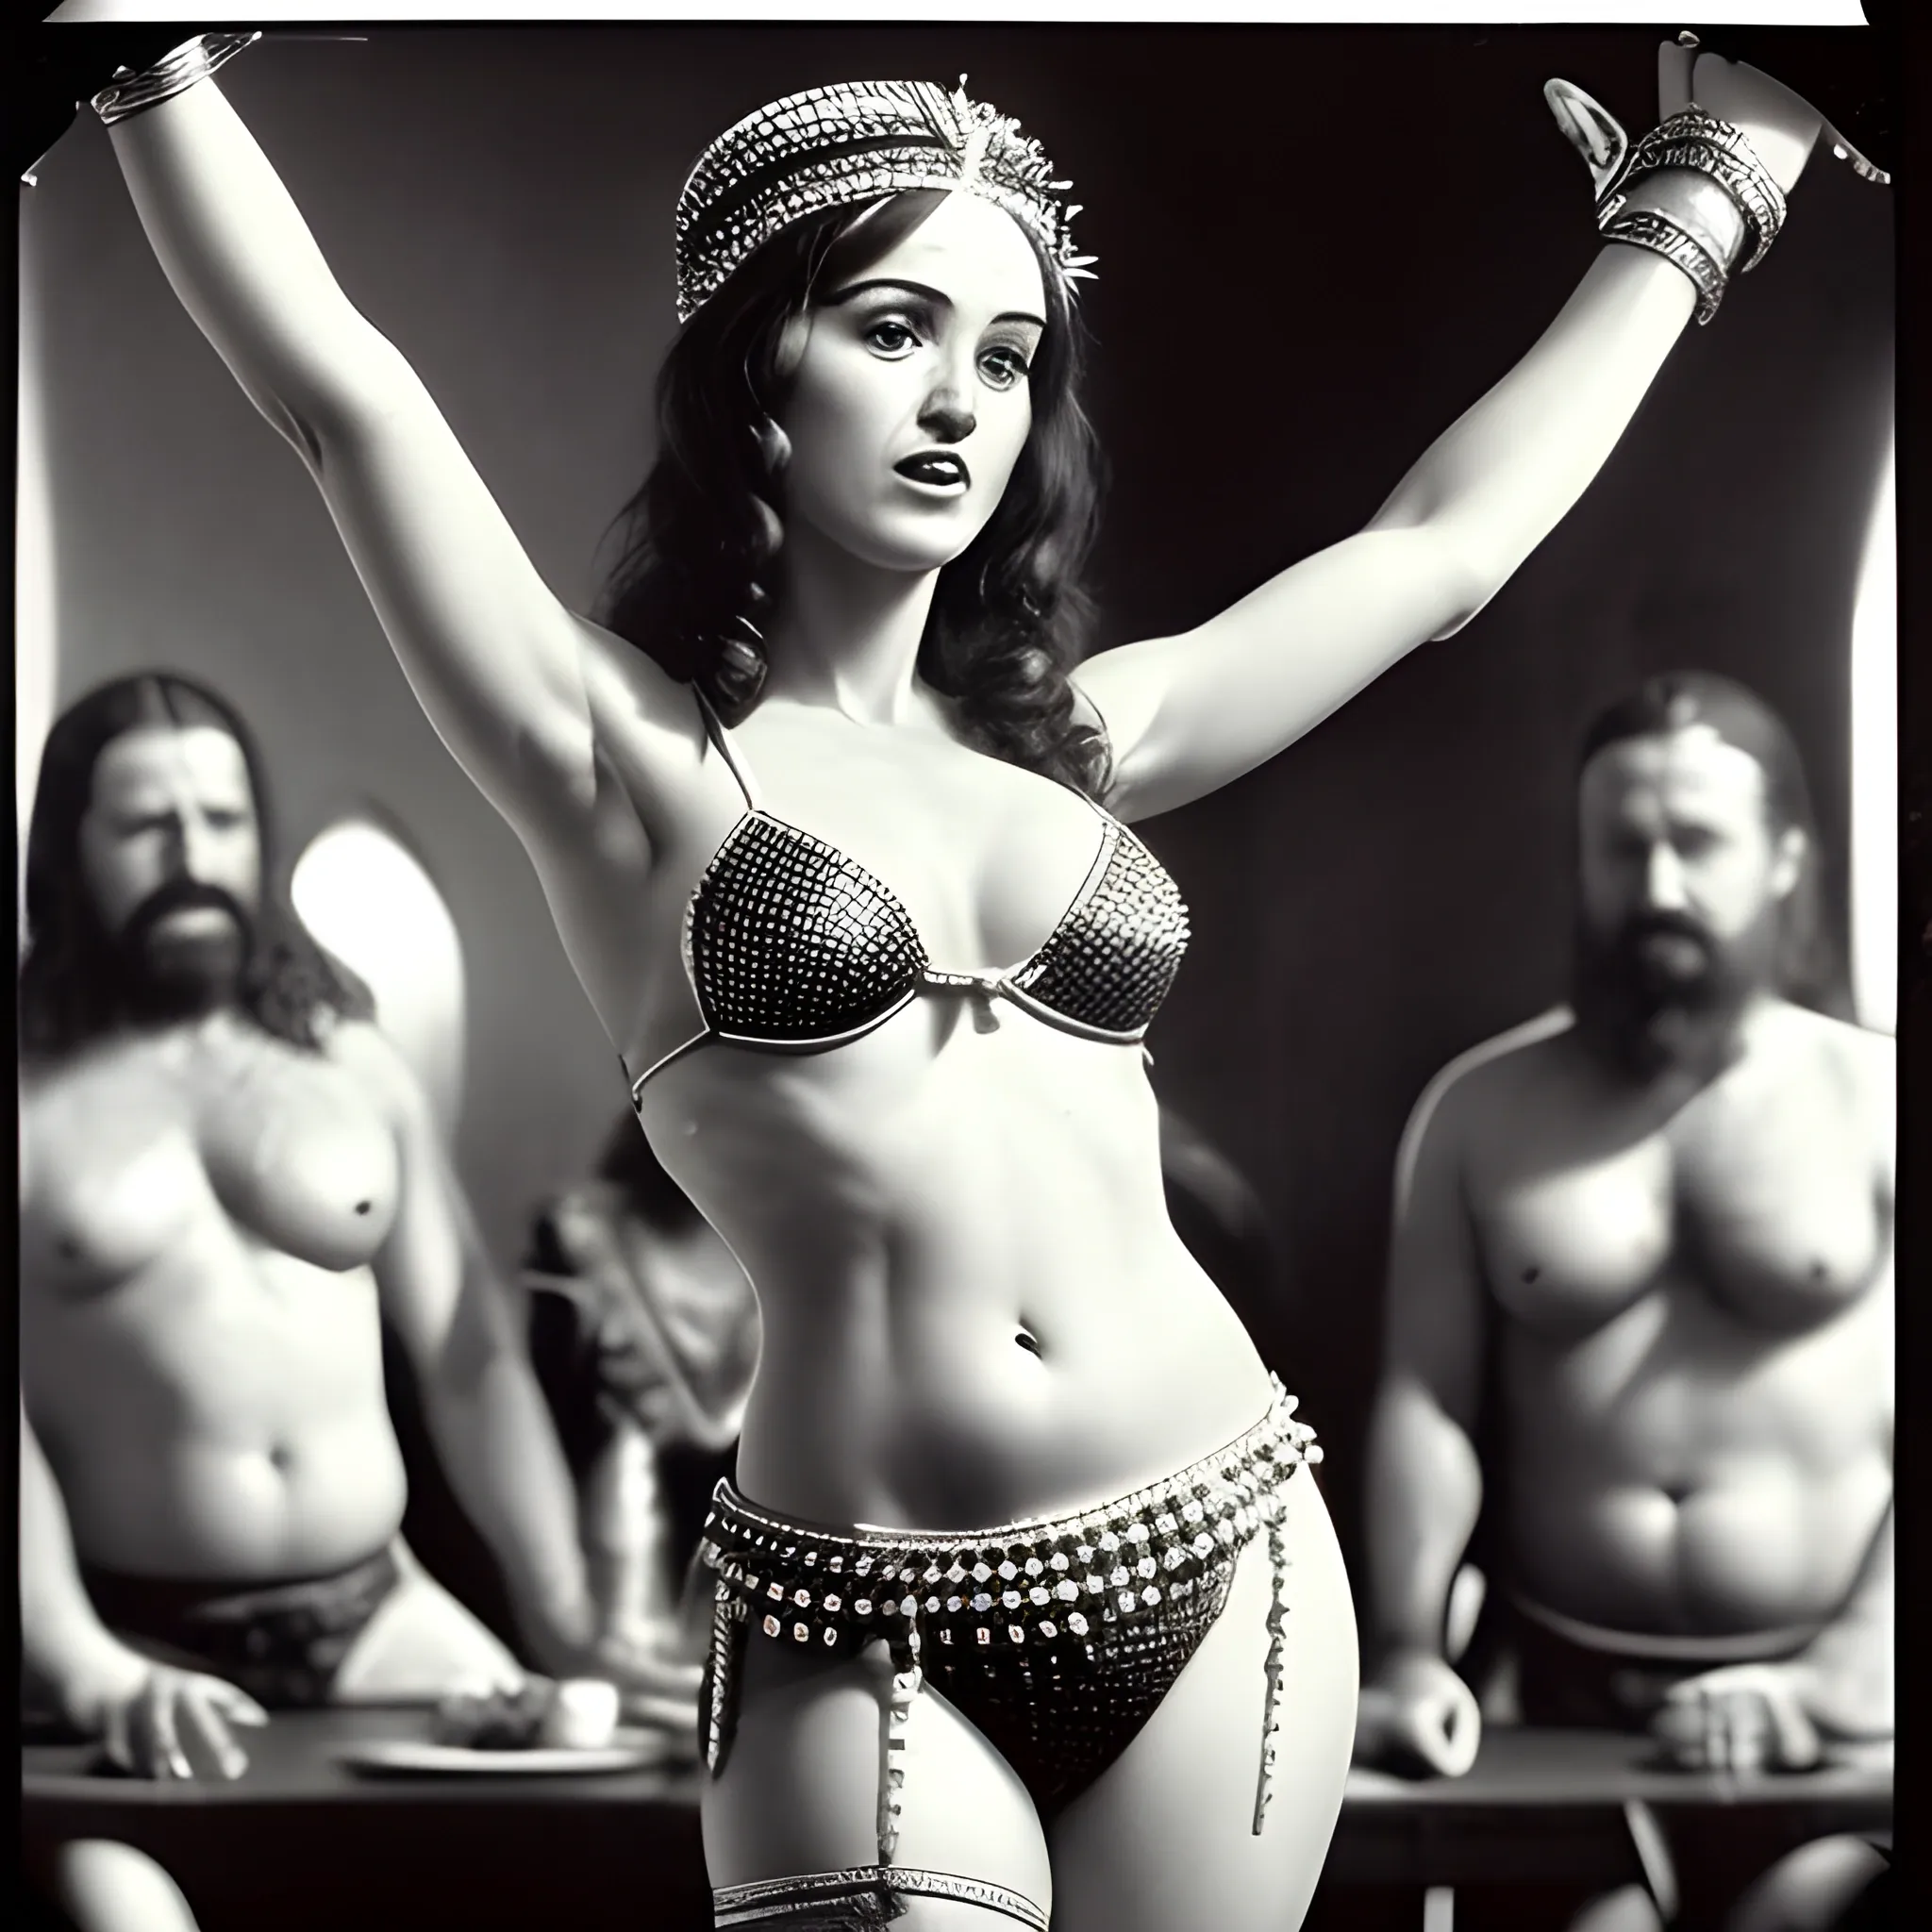 The last supper, a stripper doing belly dance. The apostles having jelly
in the style of photo taken on film, film grain, vintage, 8k ultrafine detail, private press, associated press photo, masterpiece, cinematic